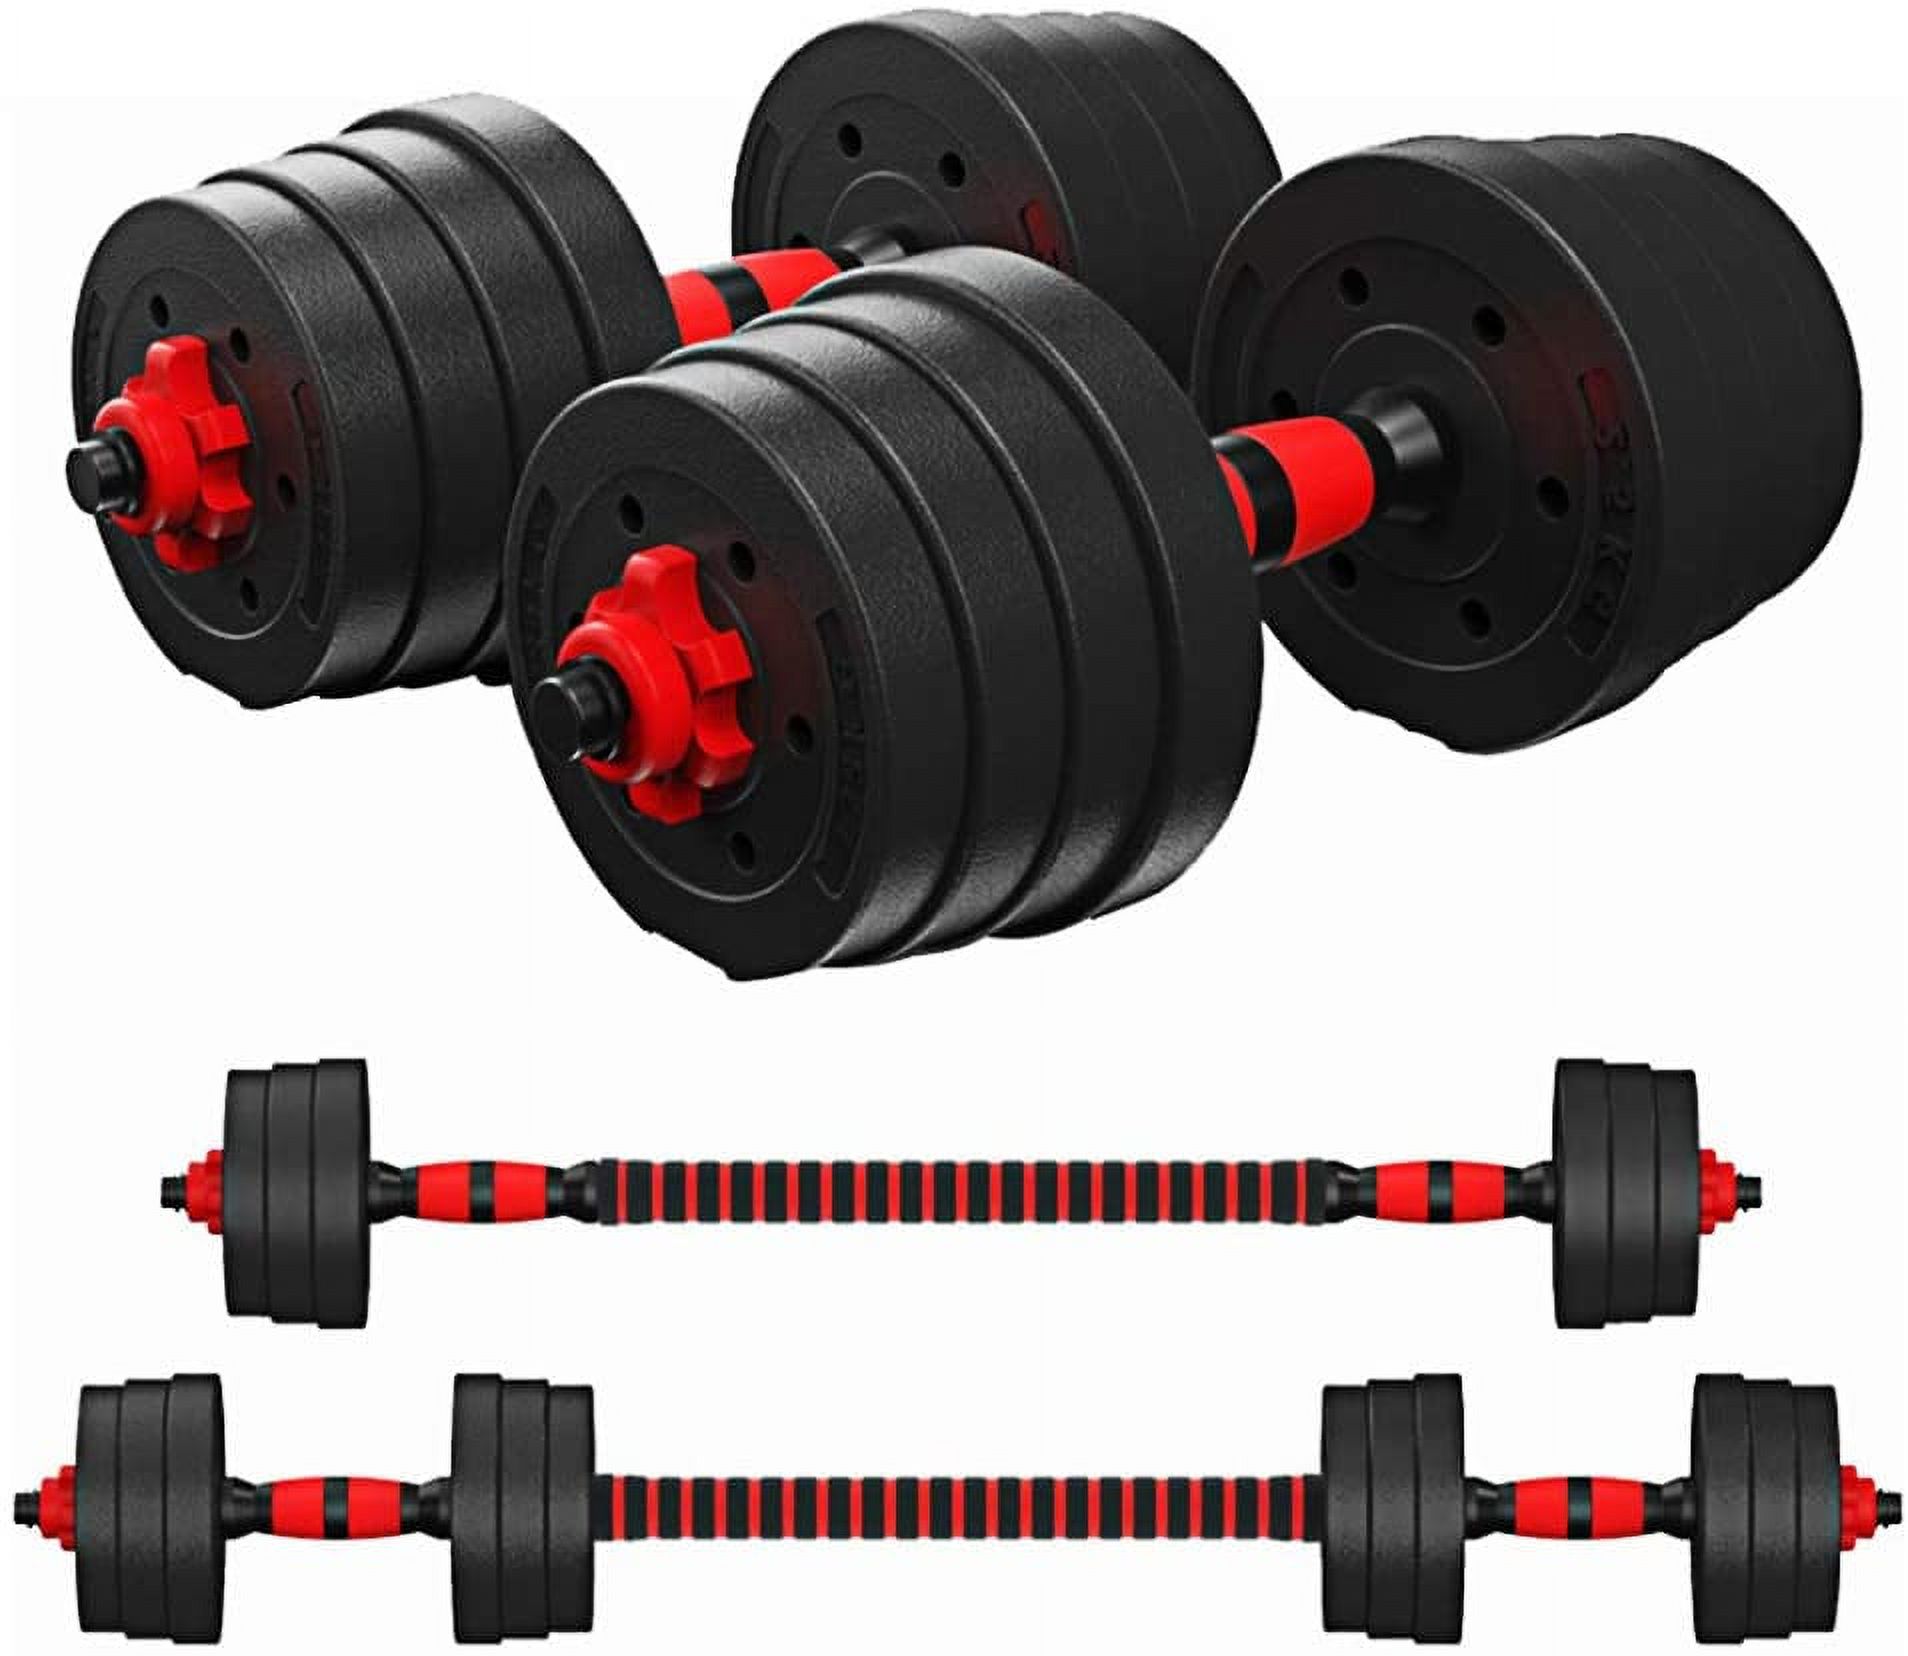 66LB Adjustable Dumbbell Weight Sets for Bodybuilding Training - image 1 of 8